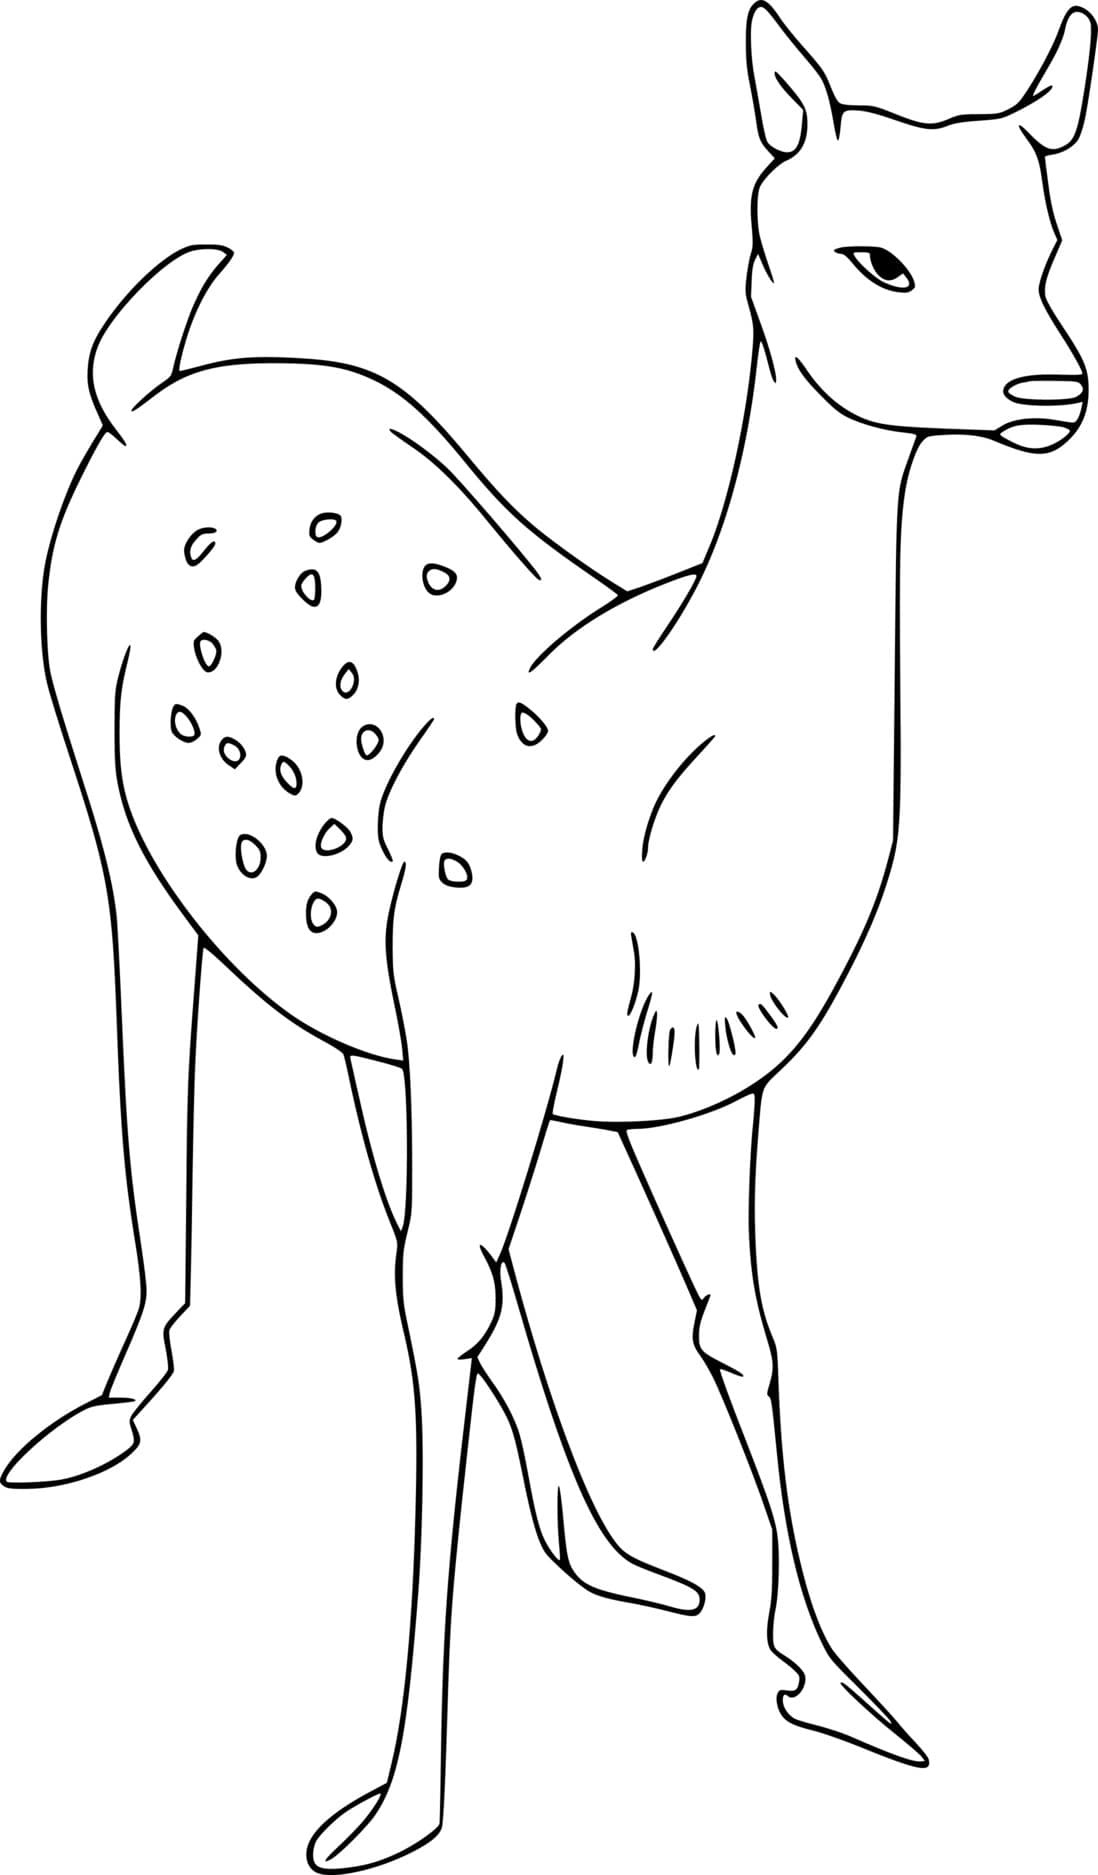 Simple Young Deer Coloring Page